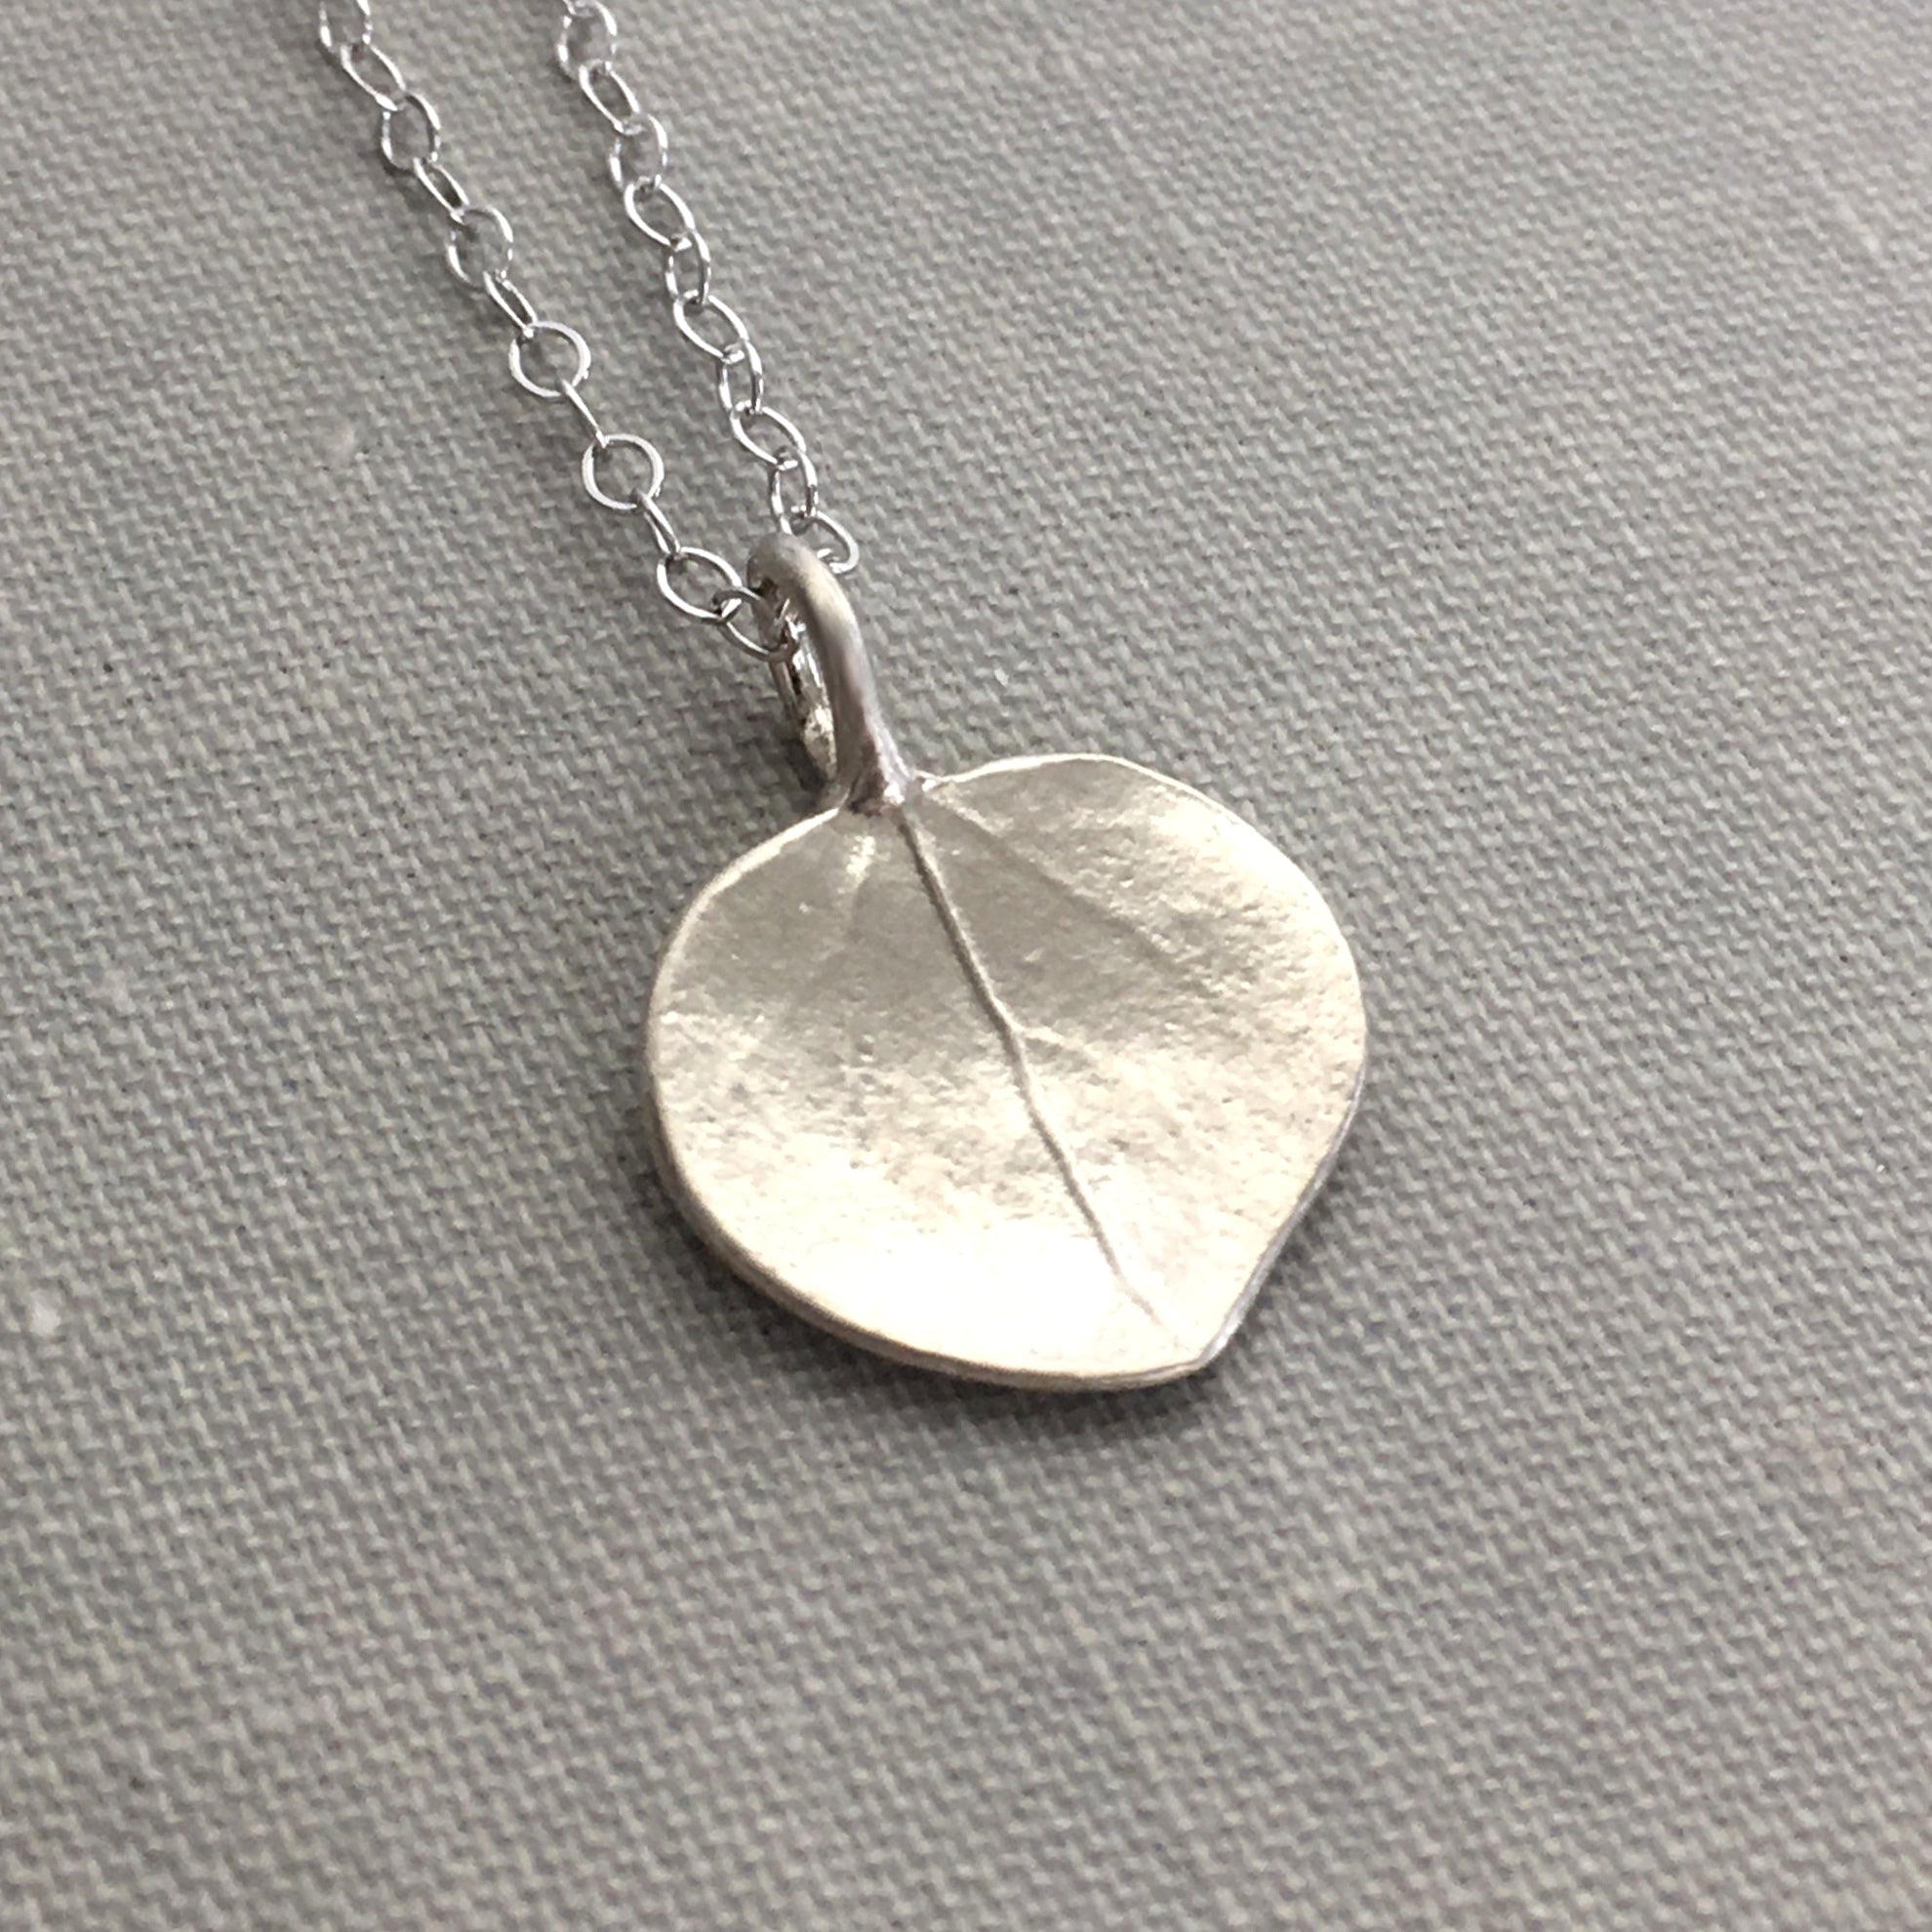 Pendant with small silver and gold leaf dome on silver chain